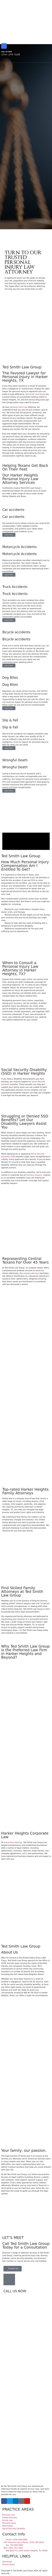 Ted Smith Law Group, PLLC - Harker Heights TX Lawyers